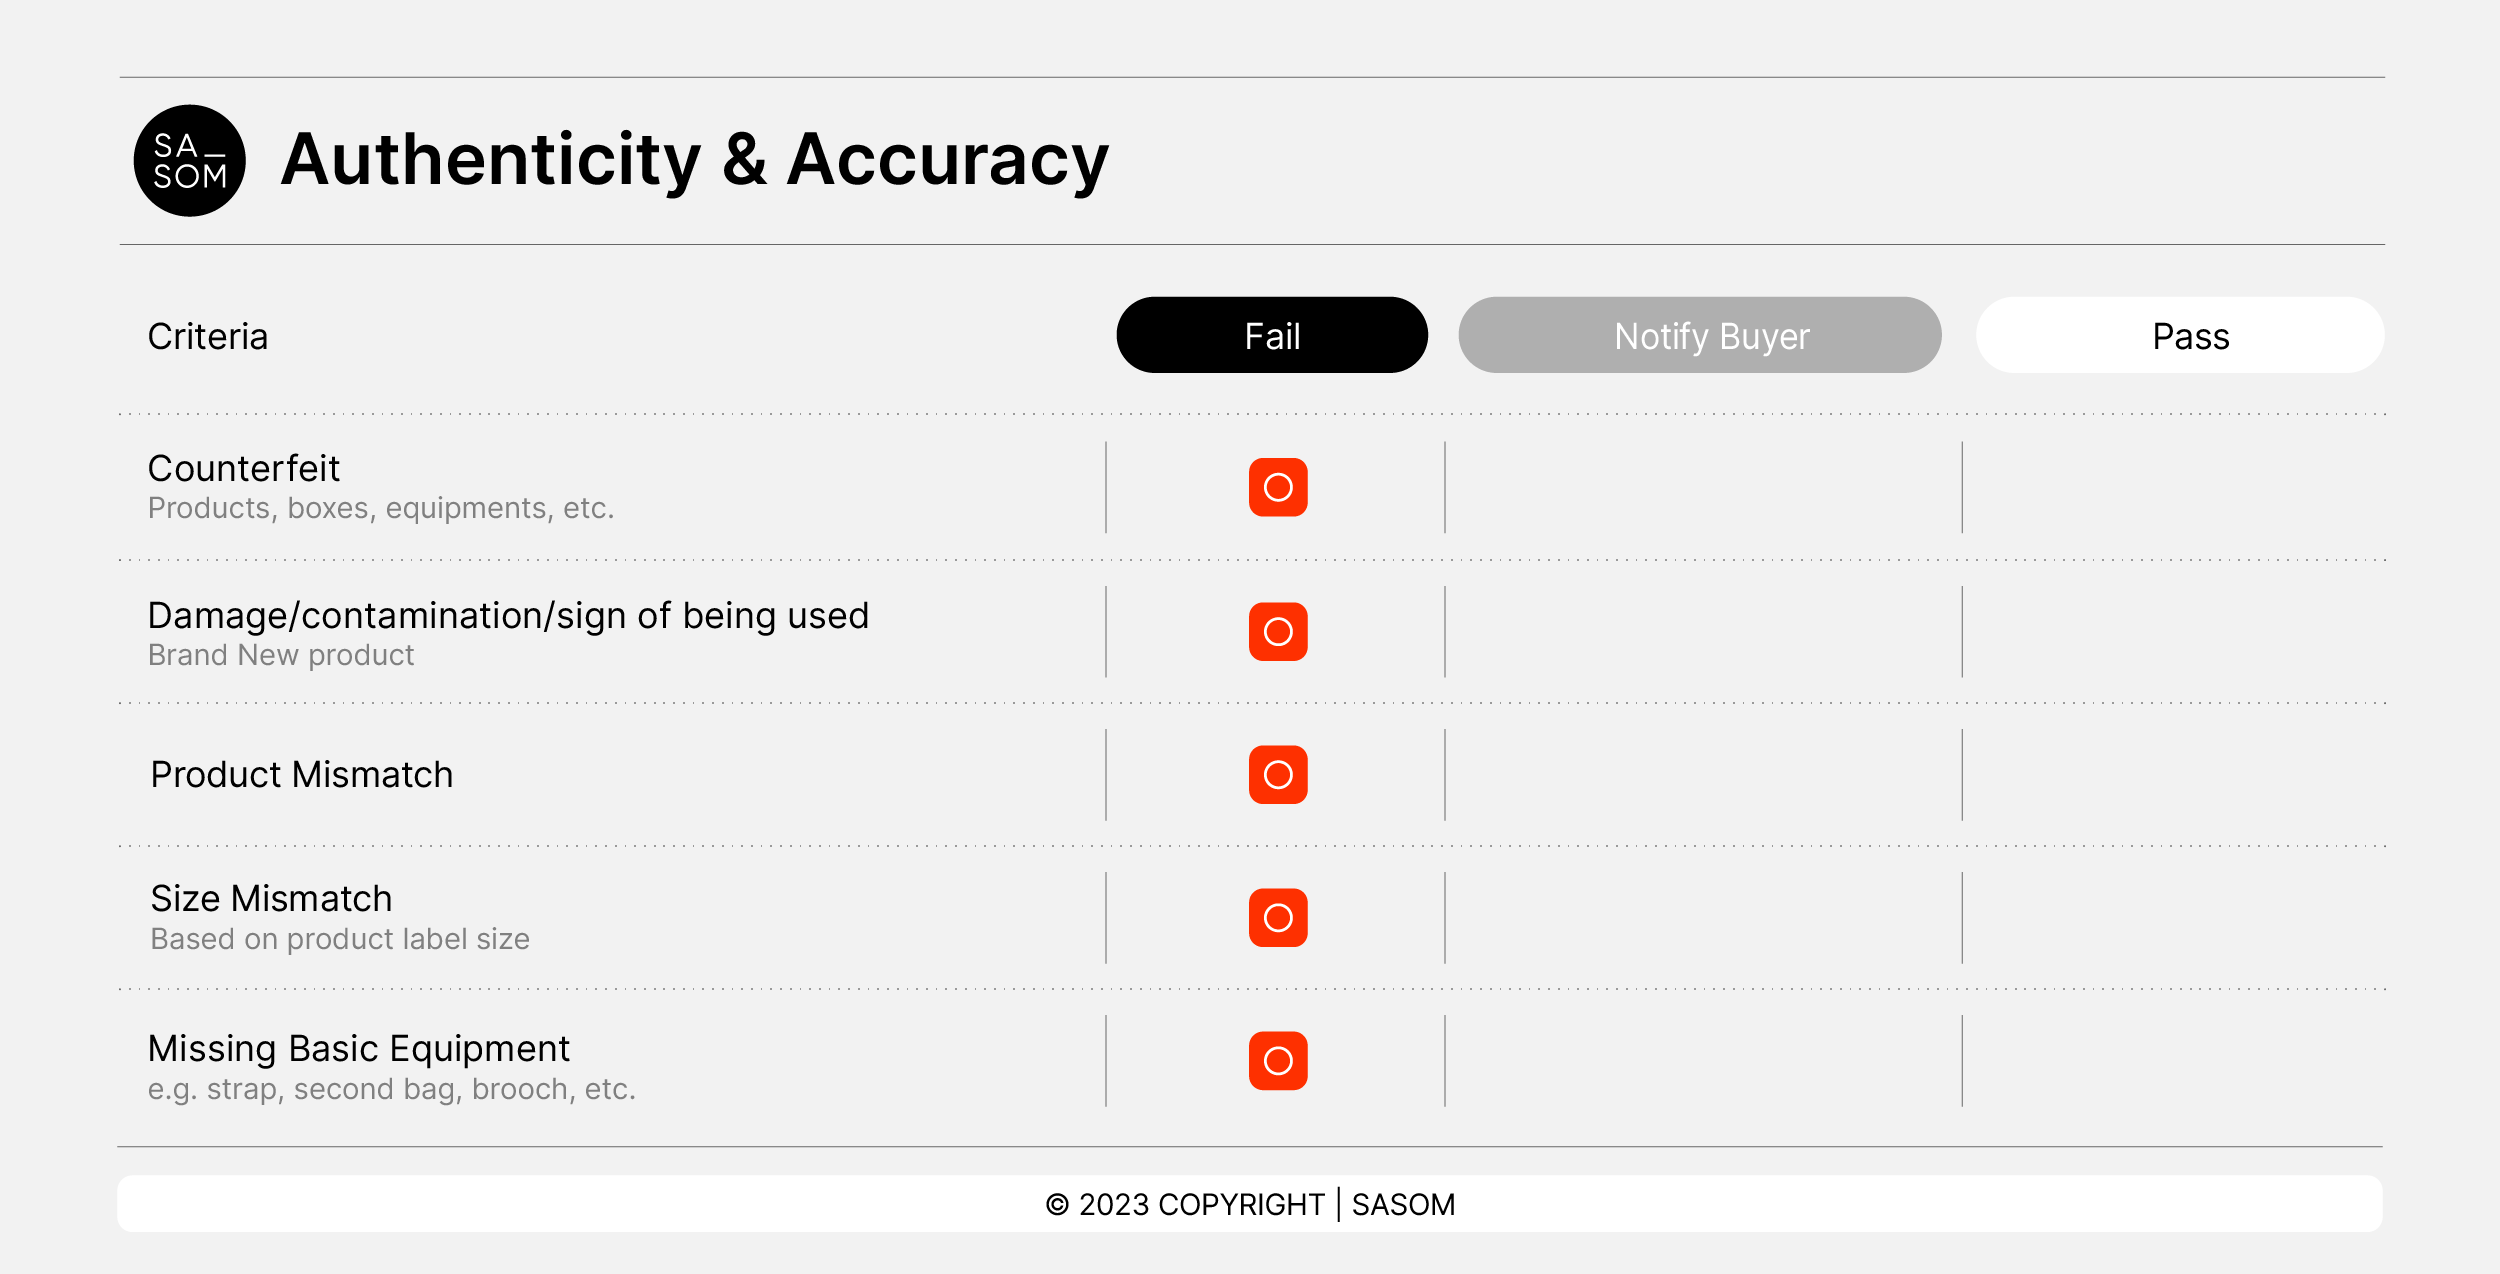 Accessories Criteria_Authenticity & Accuracy.png